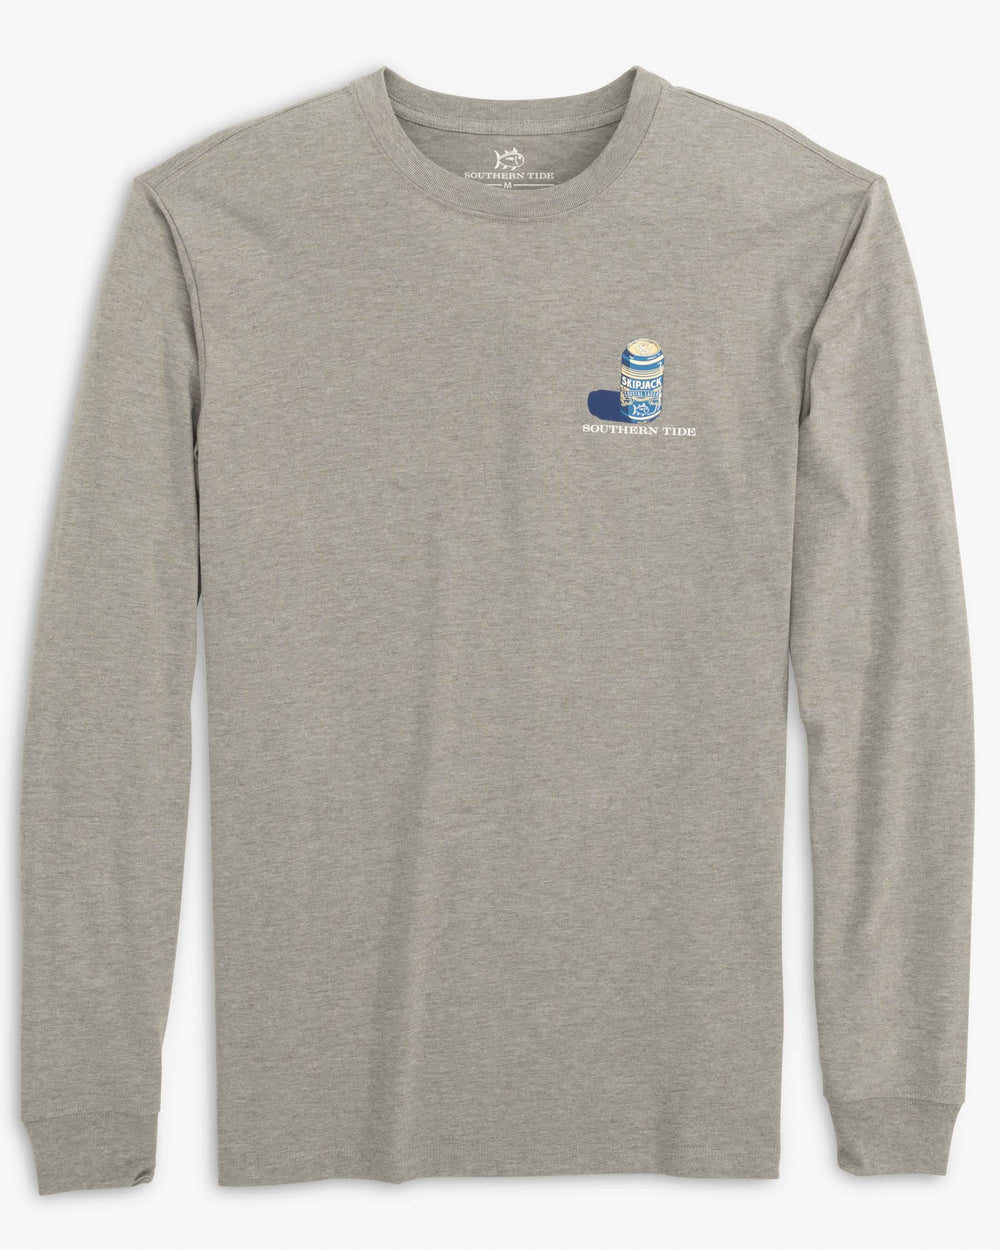 The front view of the Heather SkipJack Six Pack Long Sleeve T-Shirt by Southern Tide - Heather Quarry